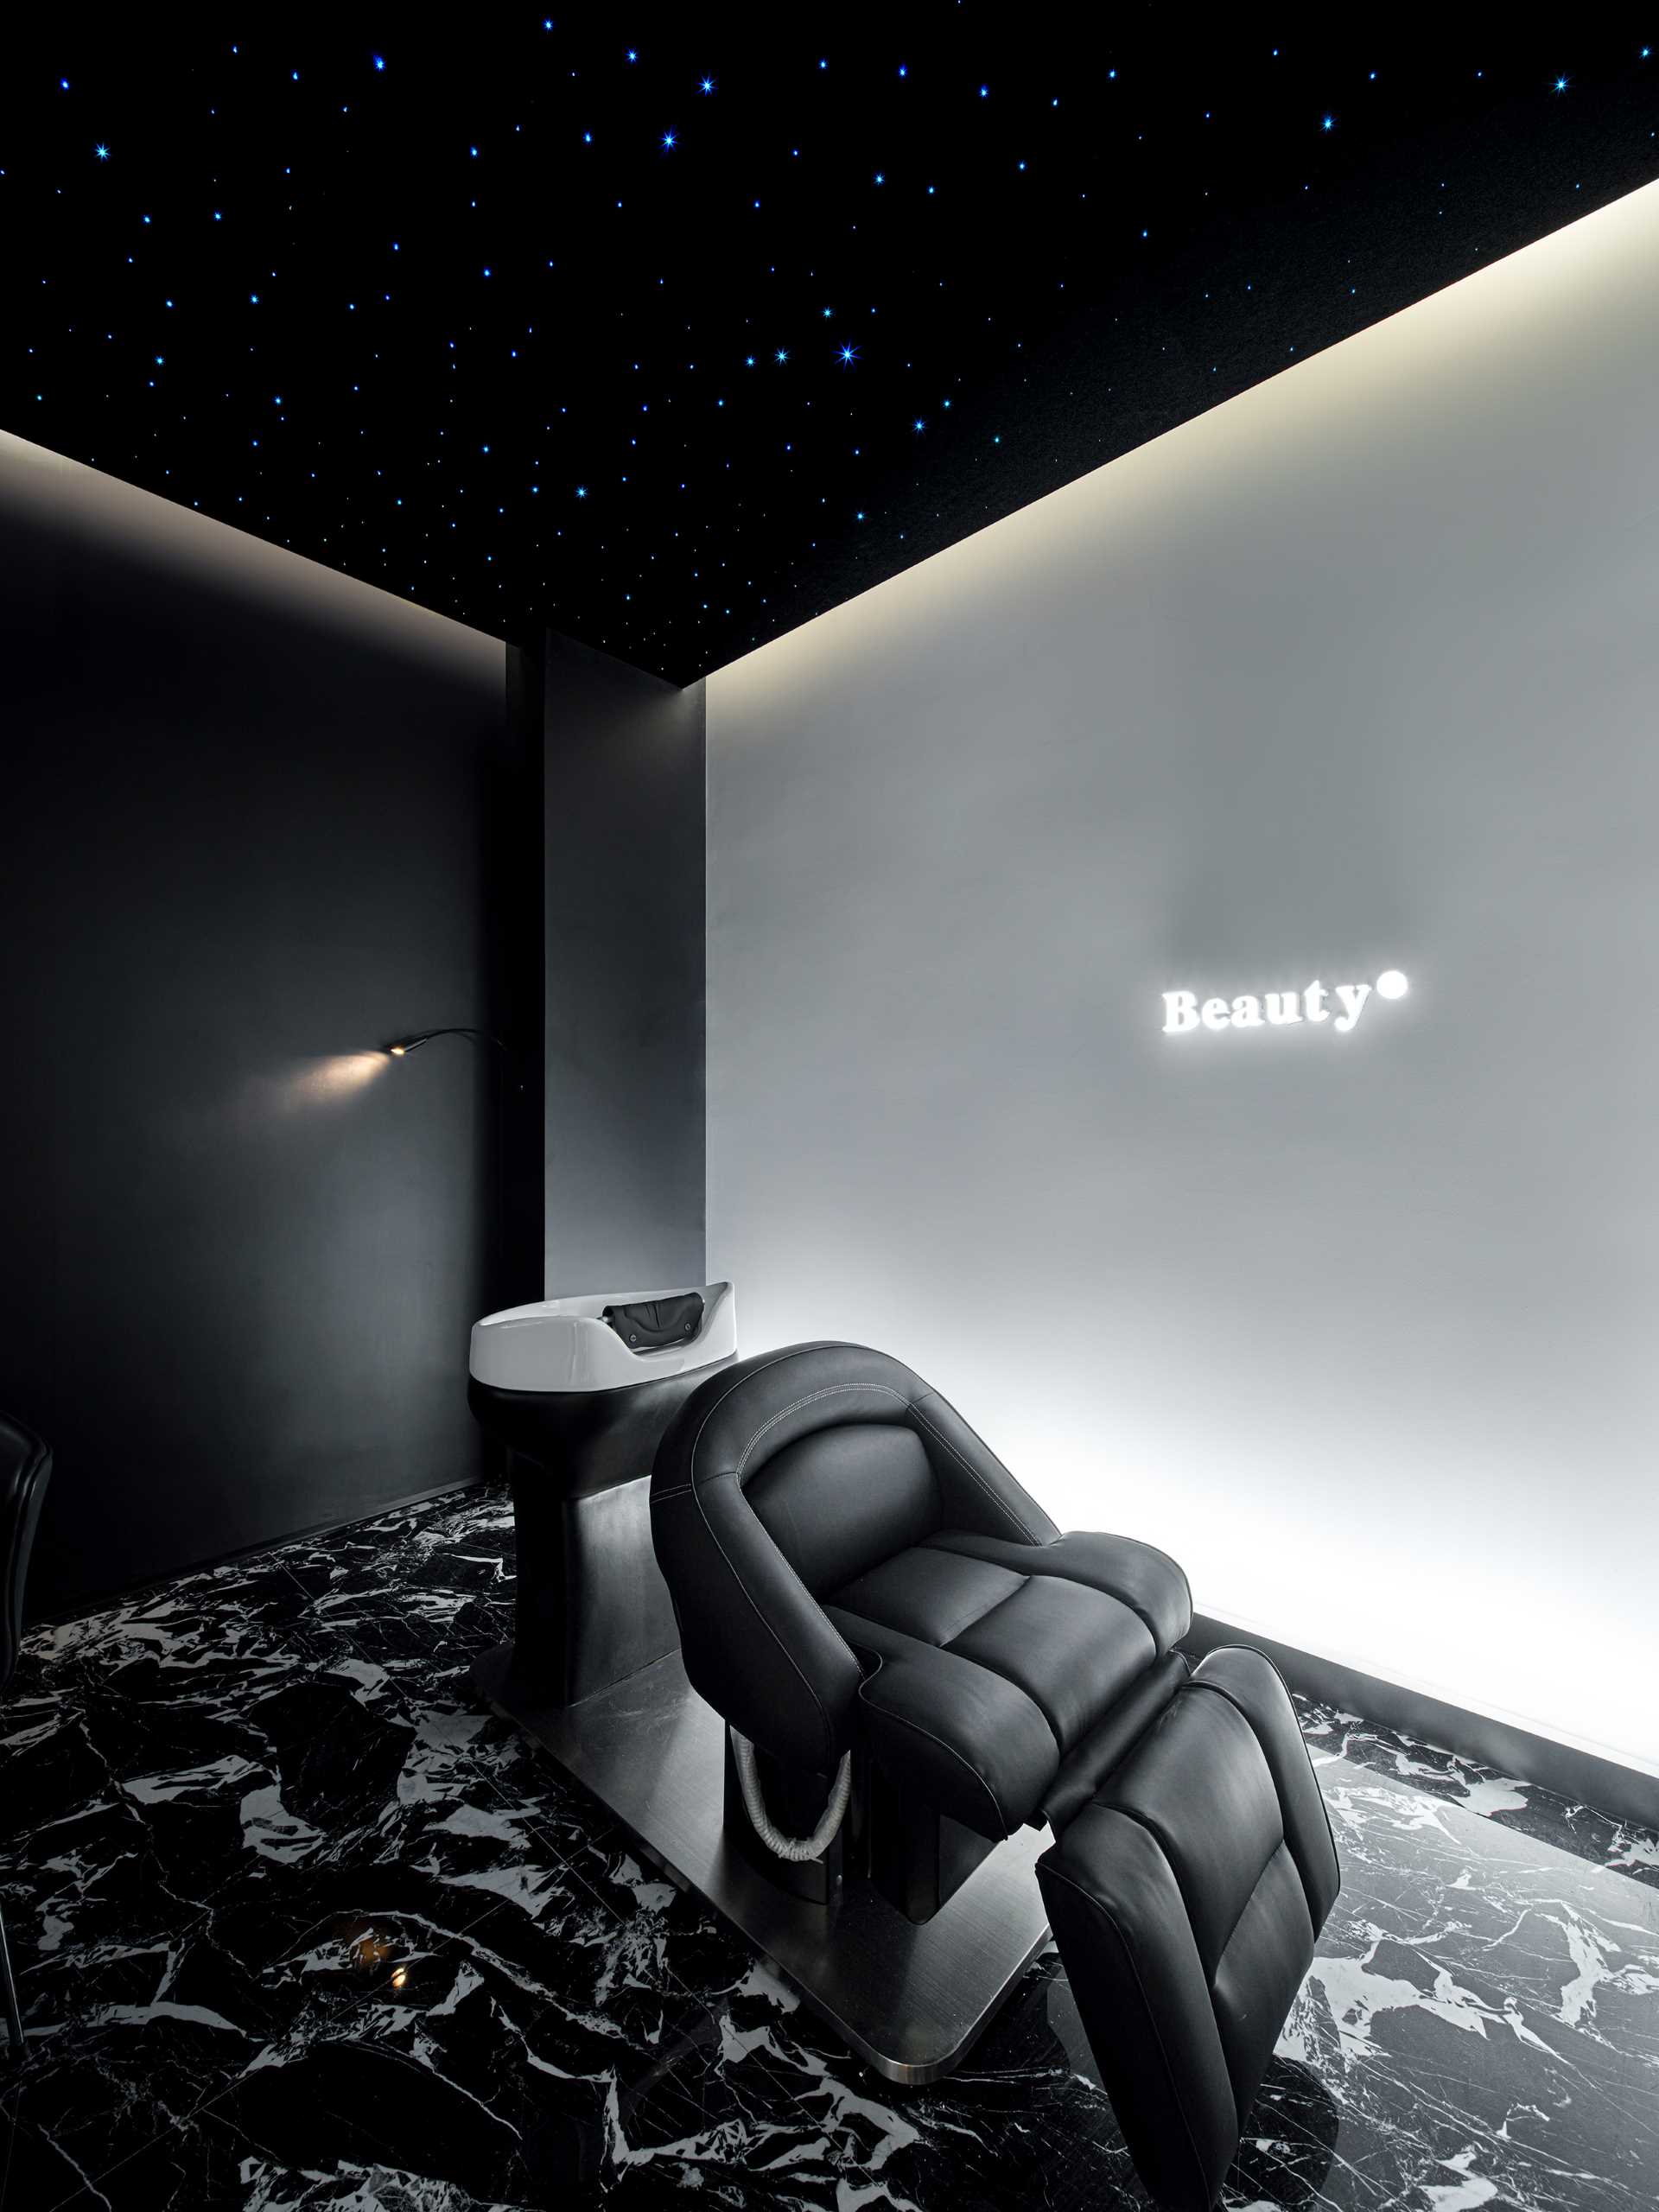 The head spa room is furnished with a dark starry sky ceiling that creates a quiet and comfortable atmosphere, ideal for head care and makeup services.